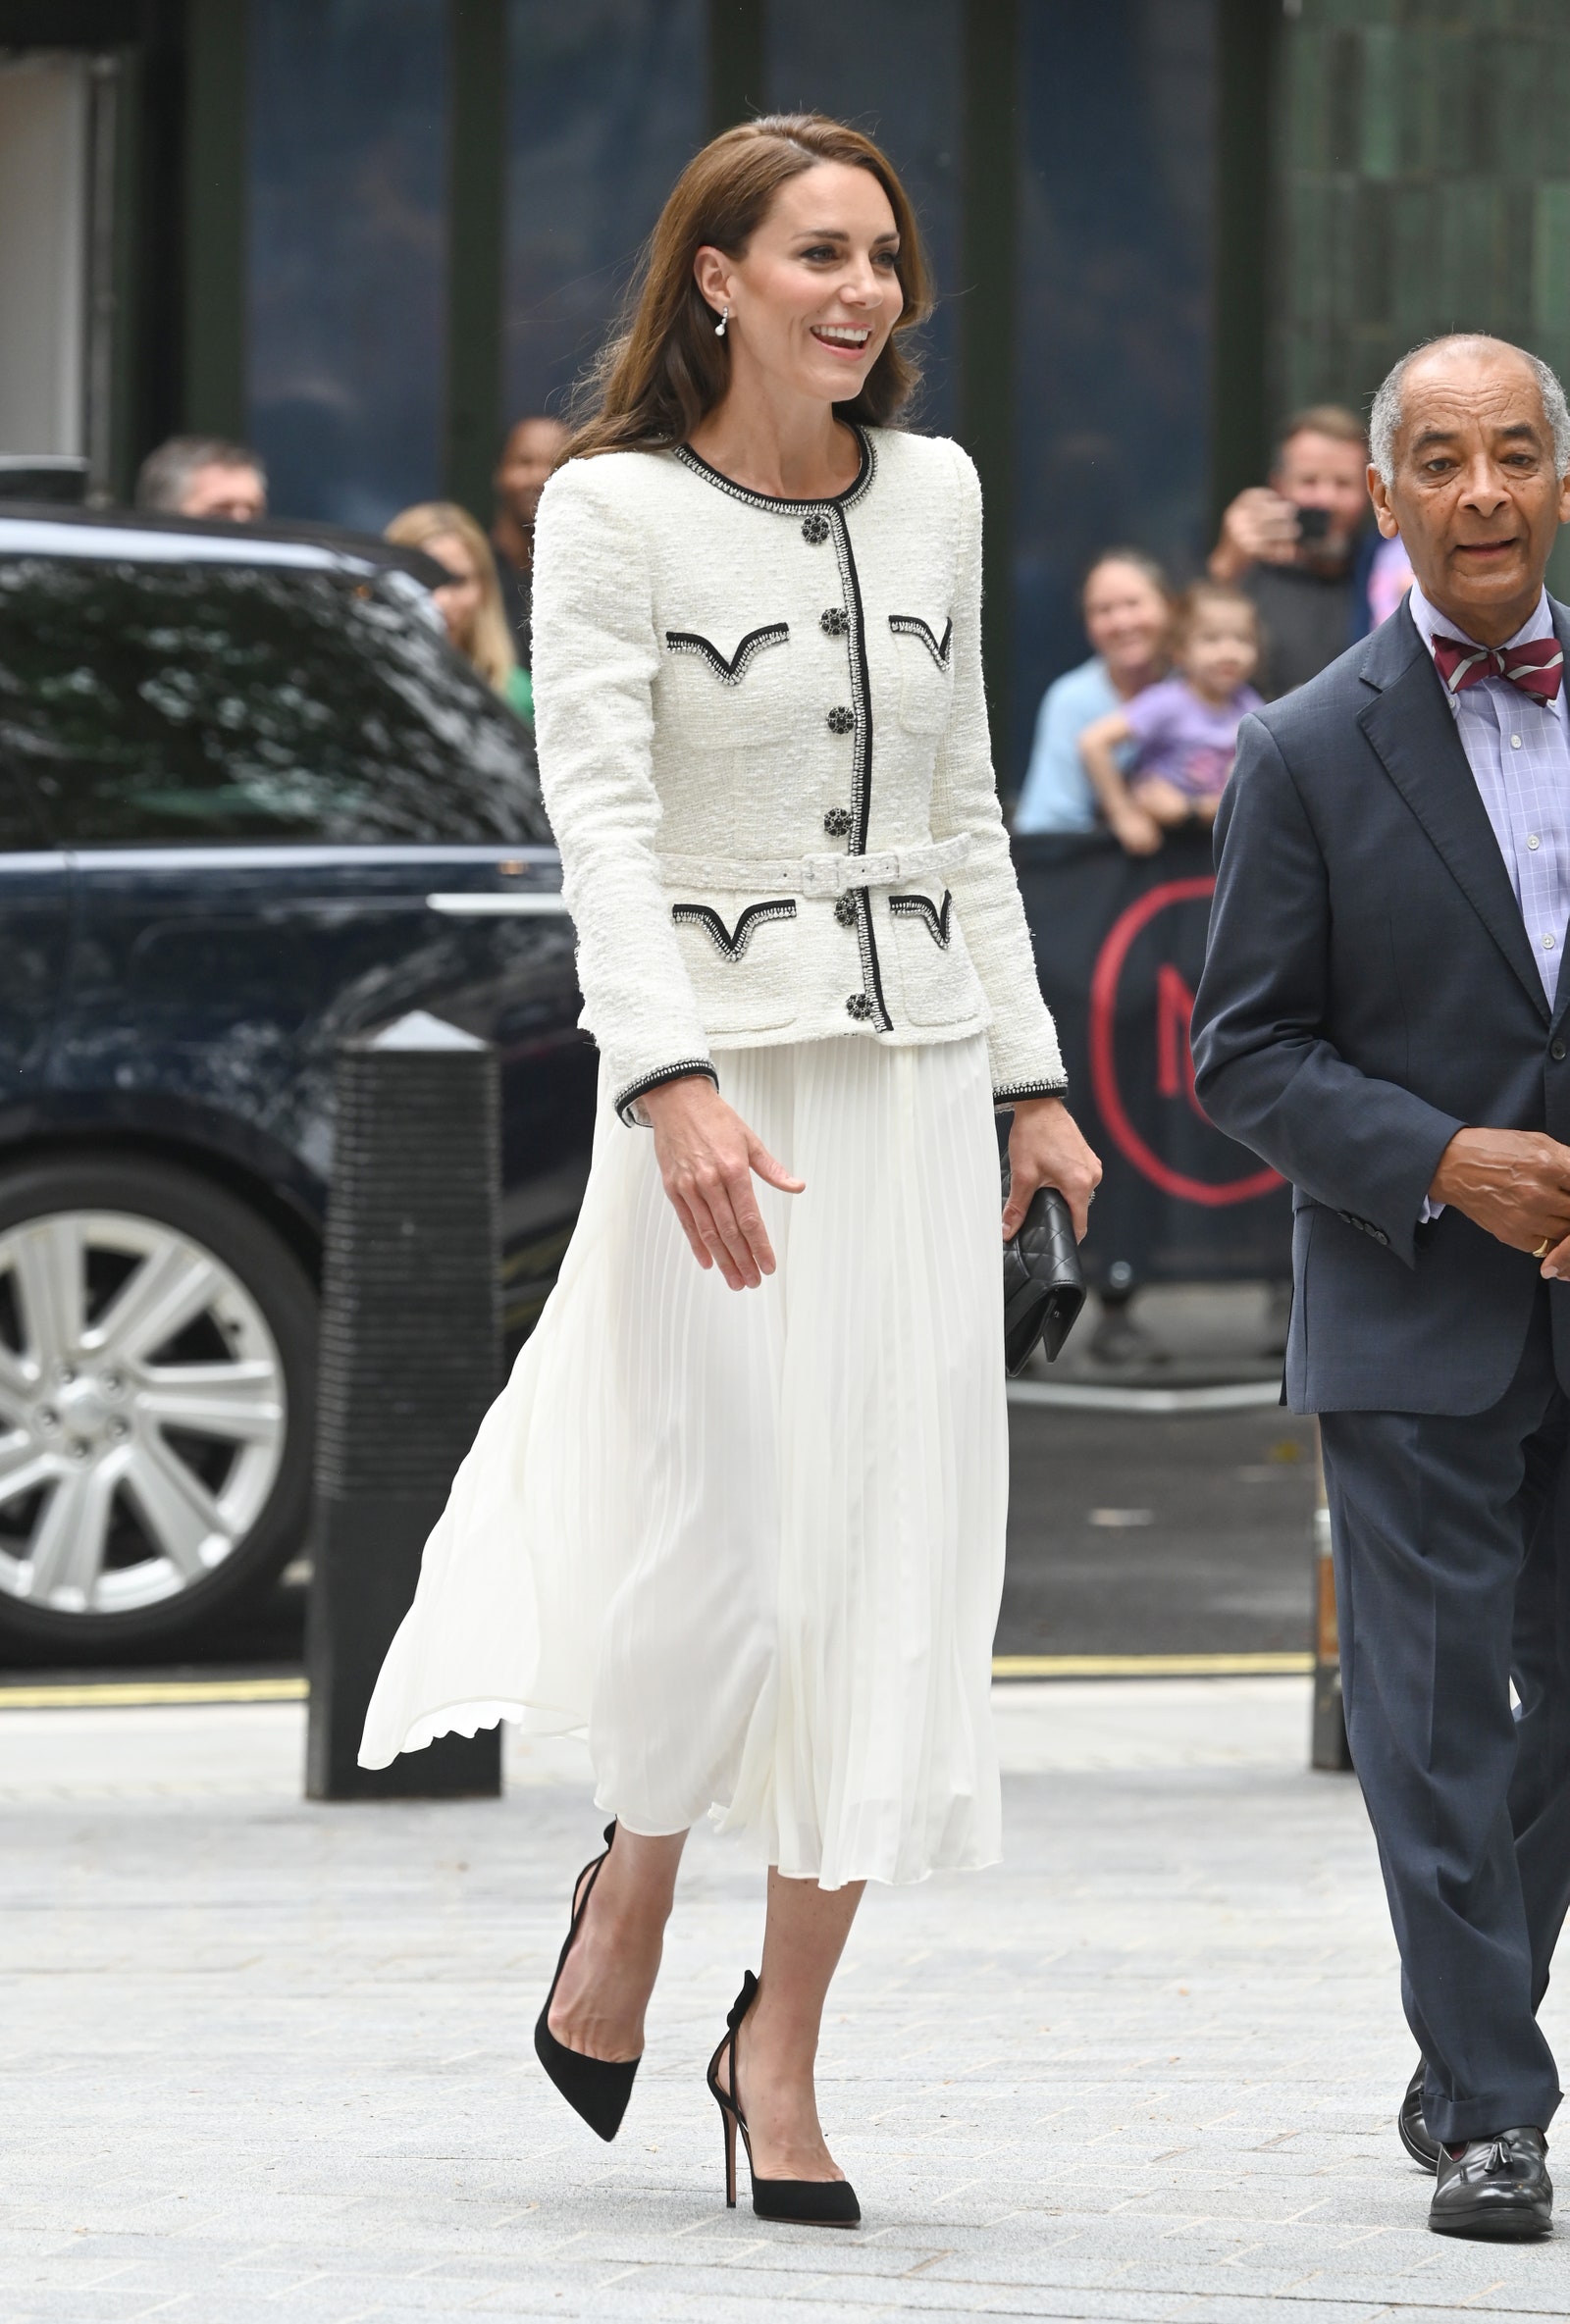 The Princess of Wales wearing SelfPortrait to the opening of the National Portrait Gallery